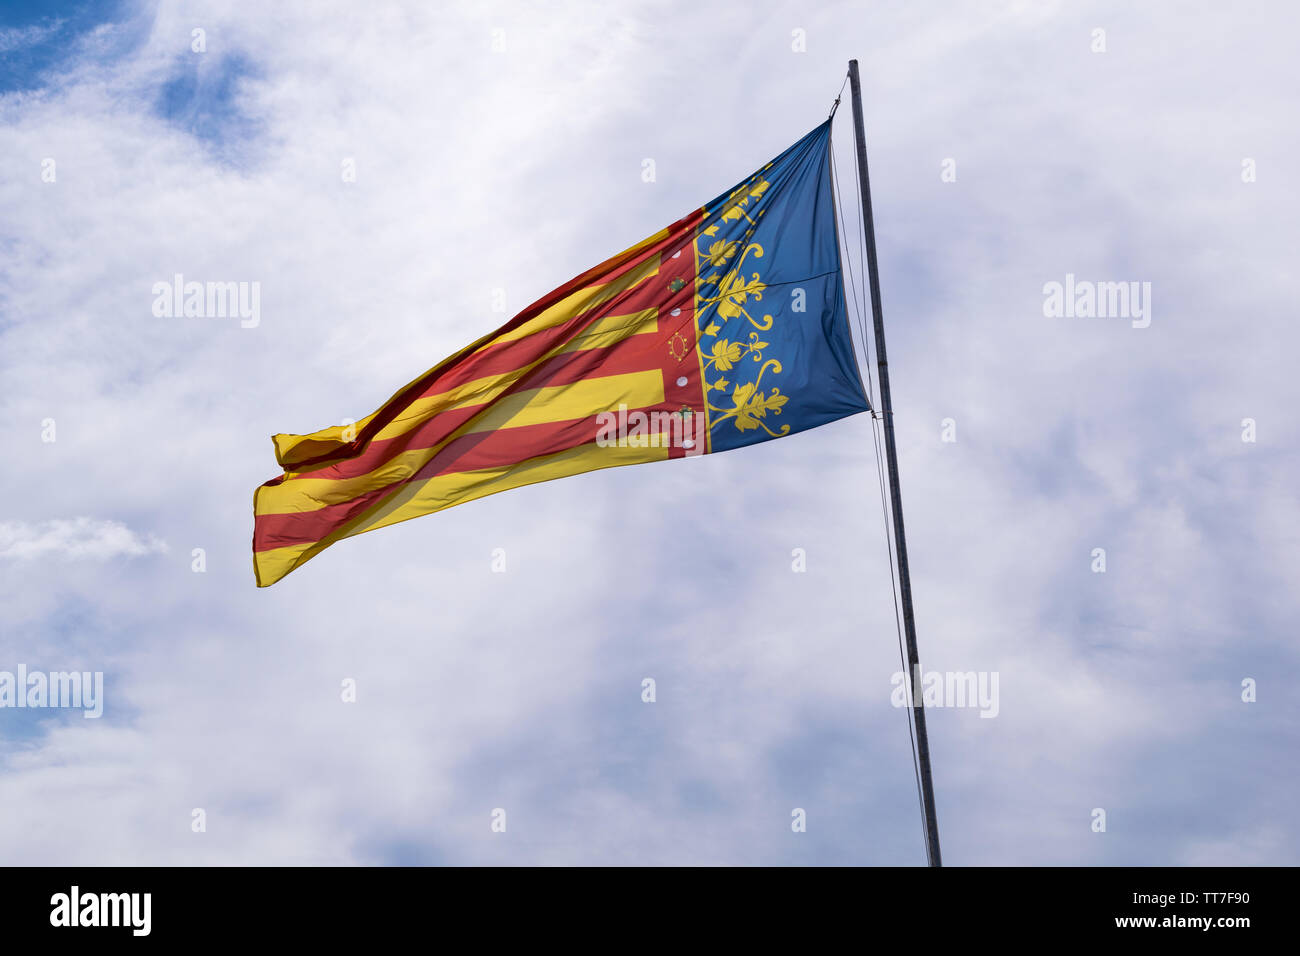 Valencian community flag waving in the wind with blue sky Stock Photo